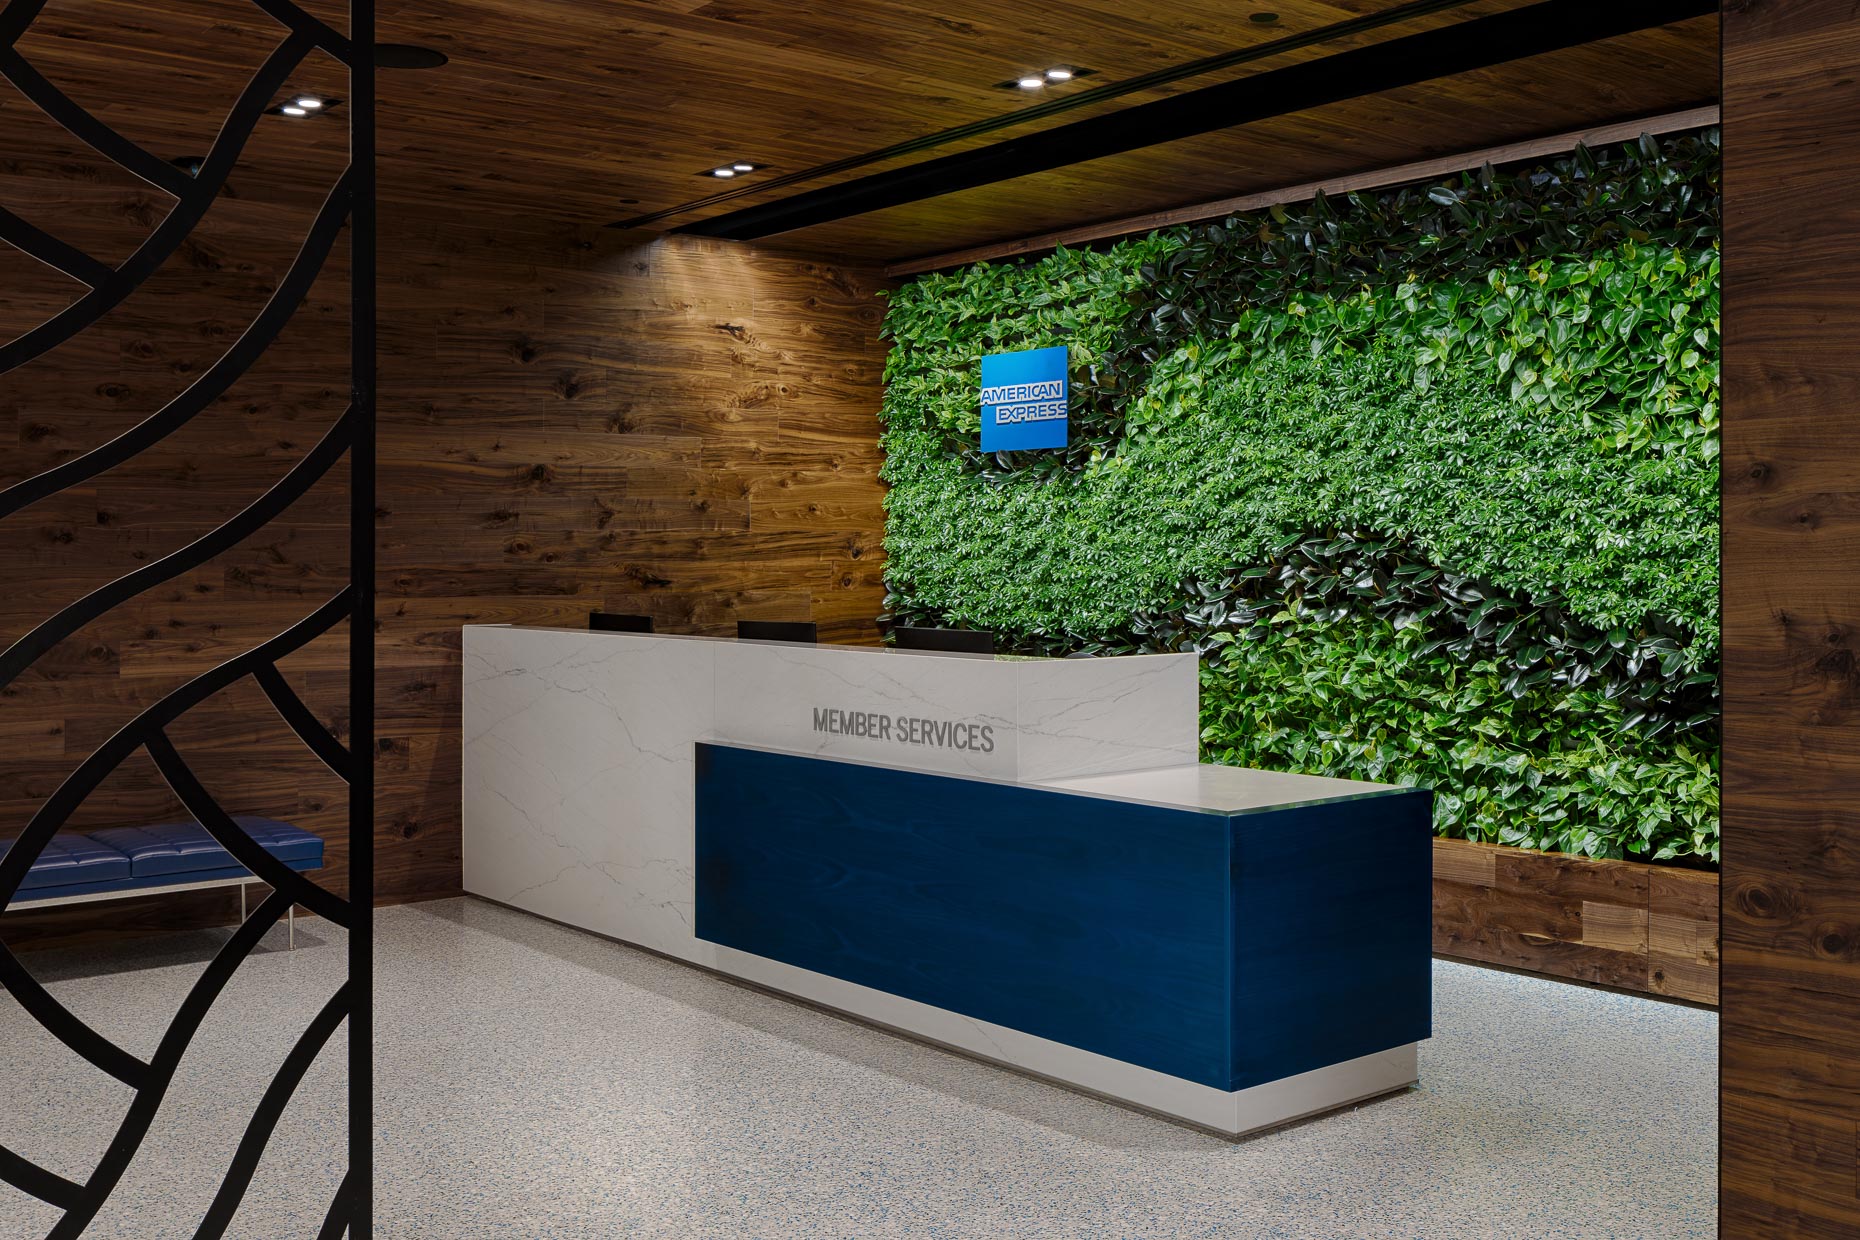 Charlotte Douglas International Airport AMEX Centurion Lounge for American Express photographed by Brad Feinknopf based in Columbus, Ohio